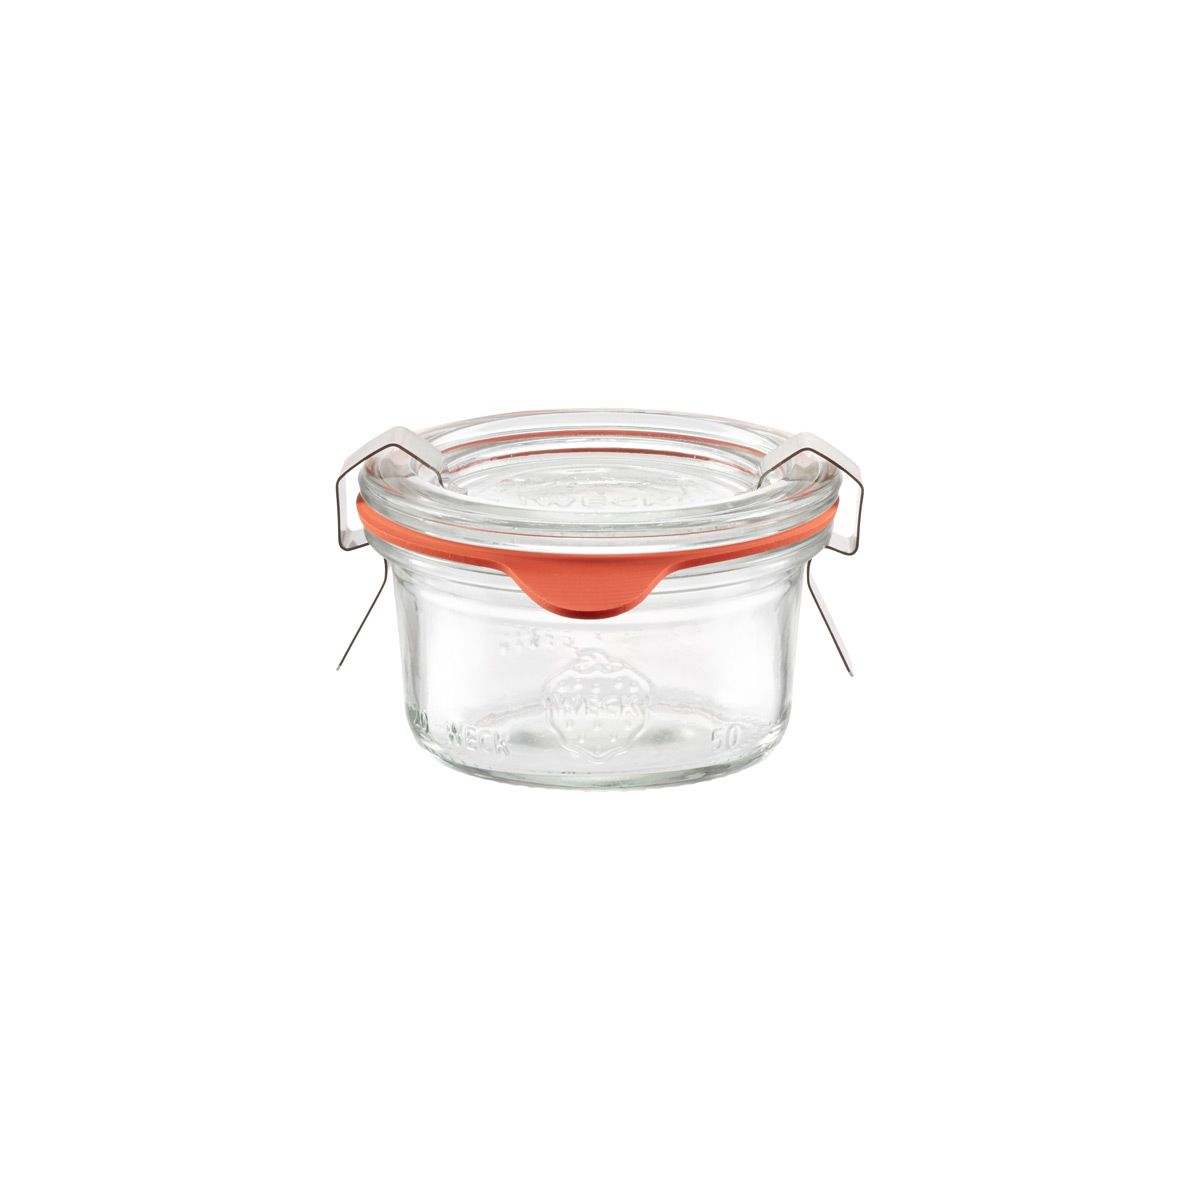 Weck Mini-Sturz Glass Canning Jars | The Container Store